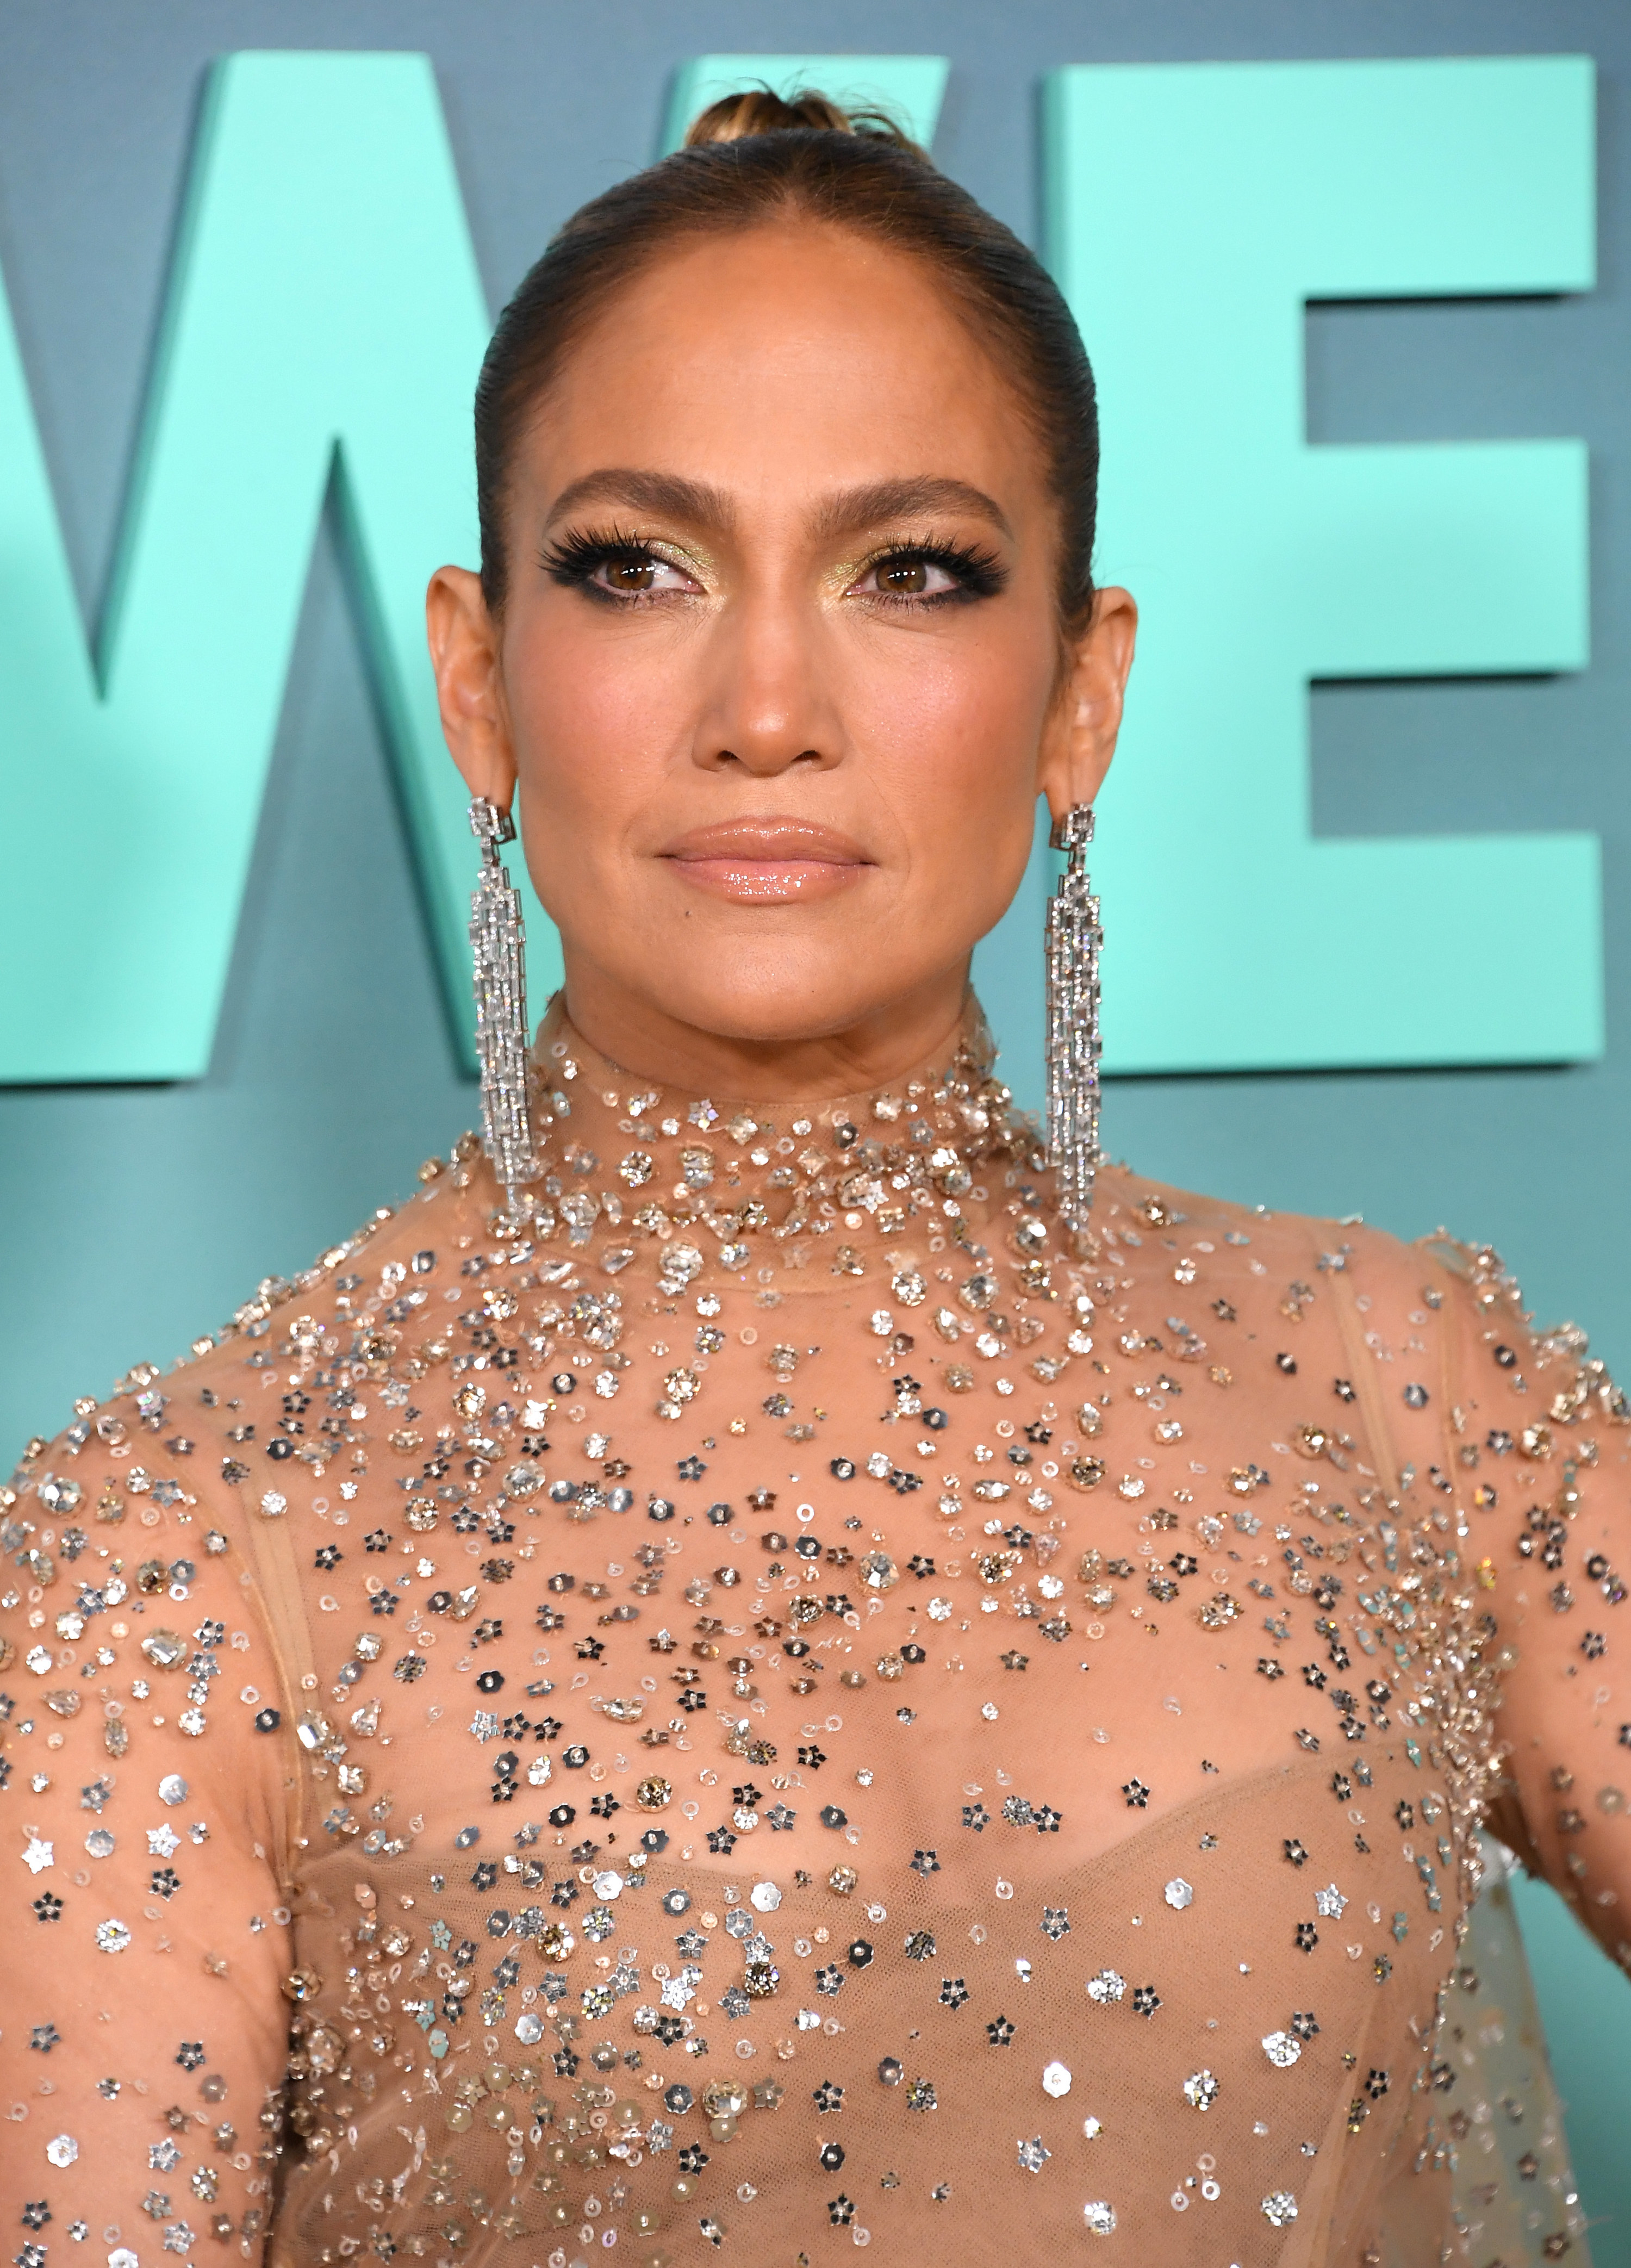 Close-up of JLo in an embellished outfit